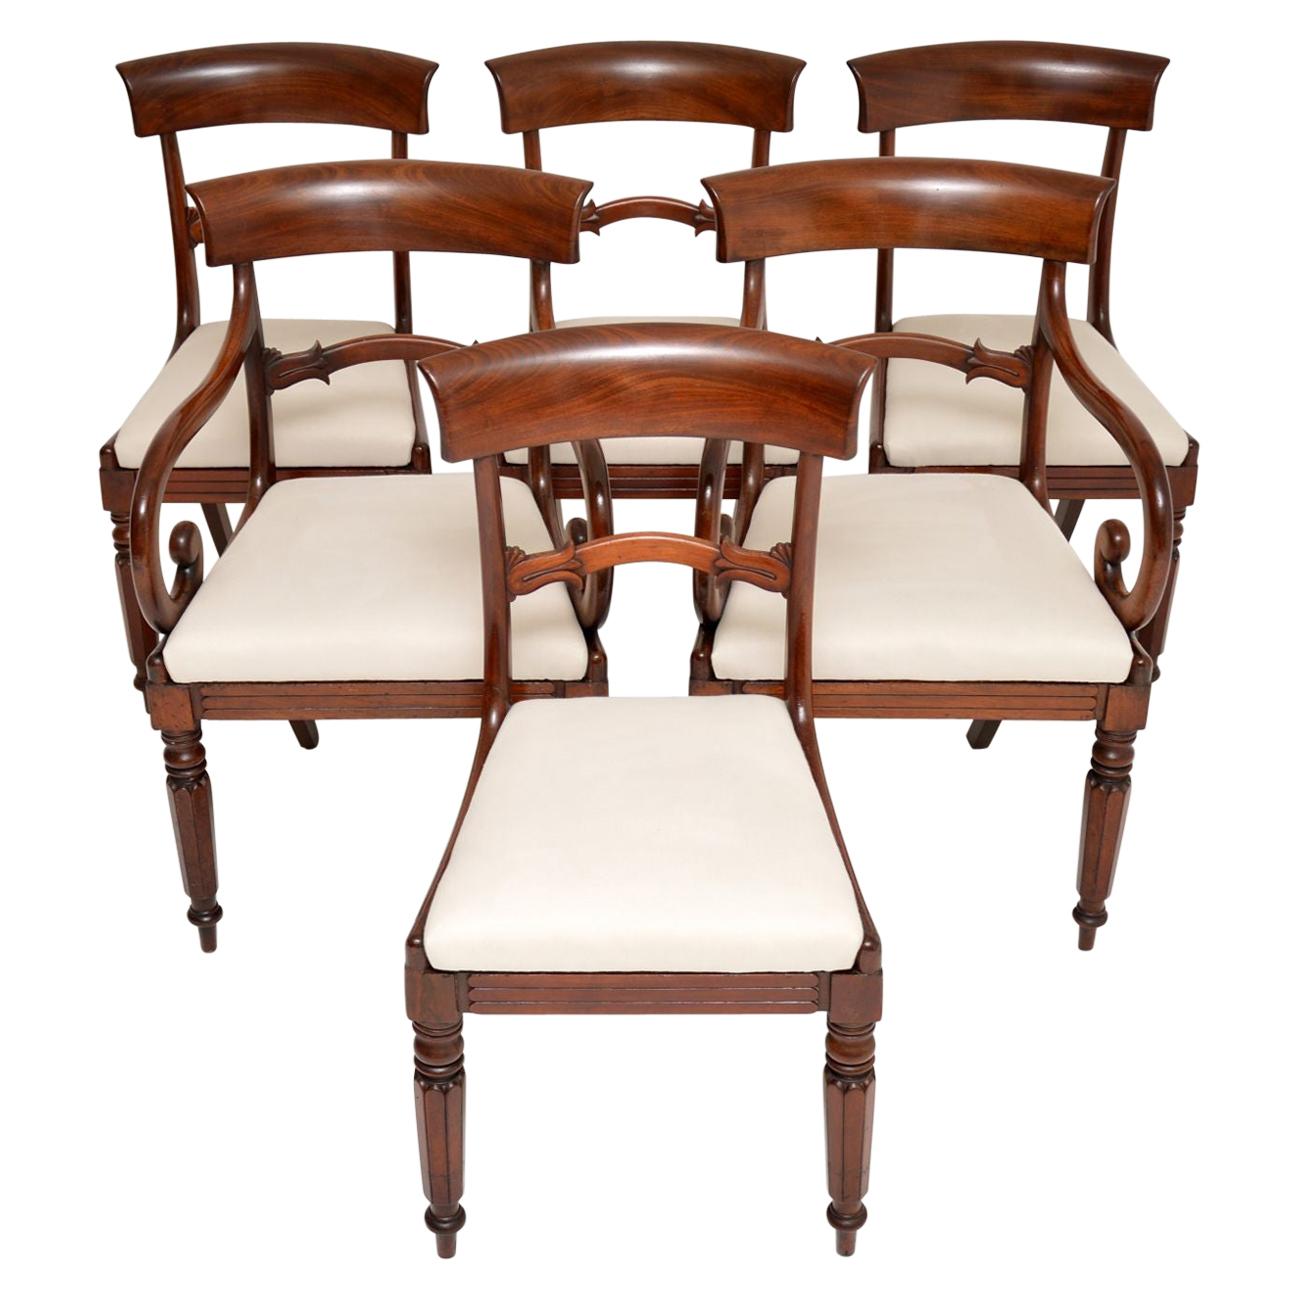 Antique Victorian Mahogany Dining Chairs